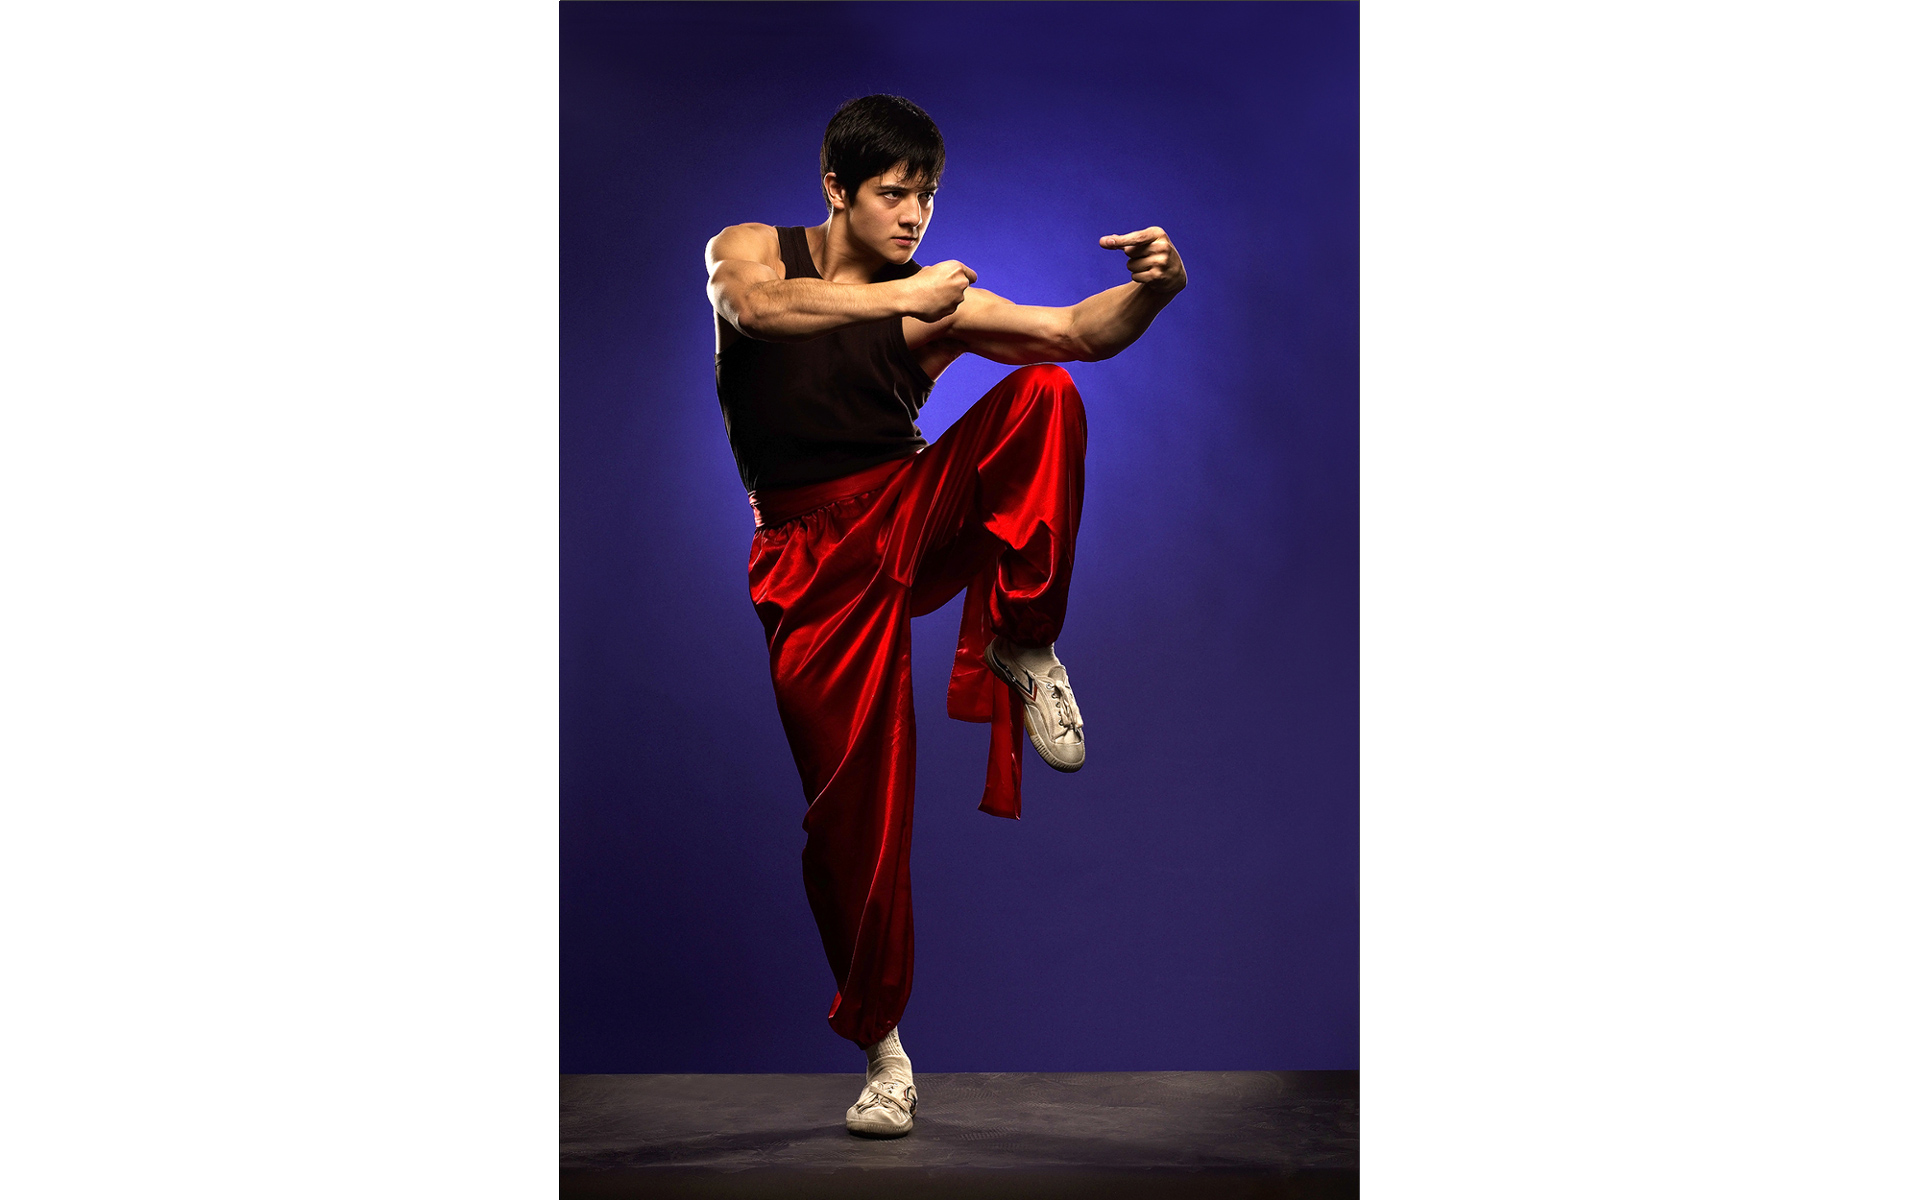 Martial artist performer in a photography studio 